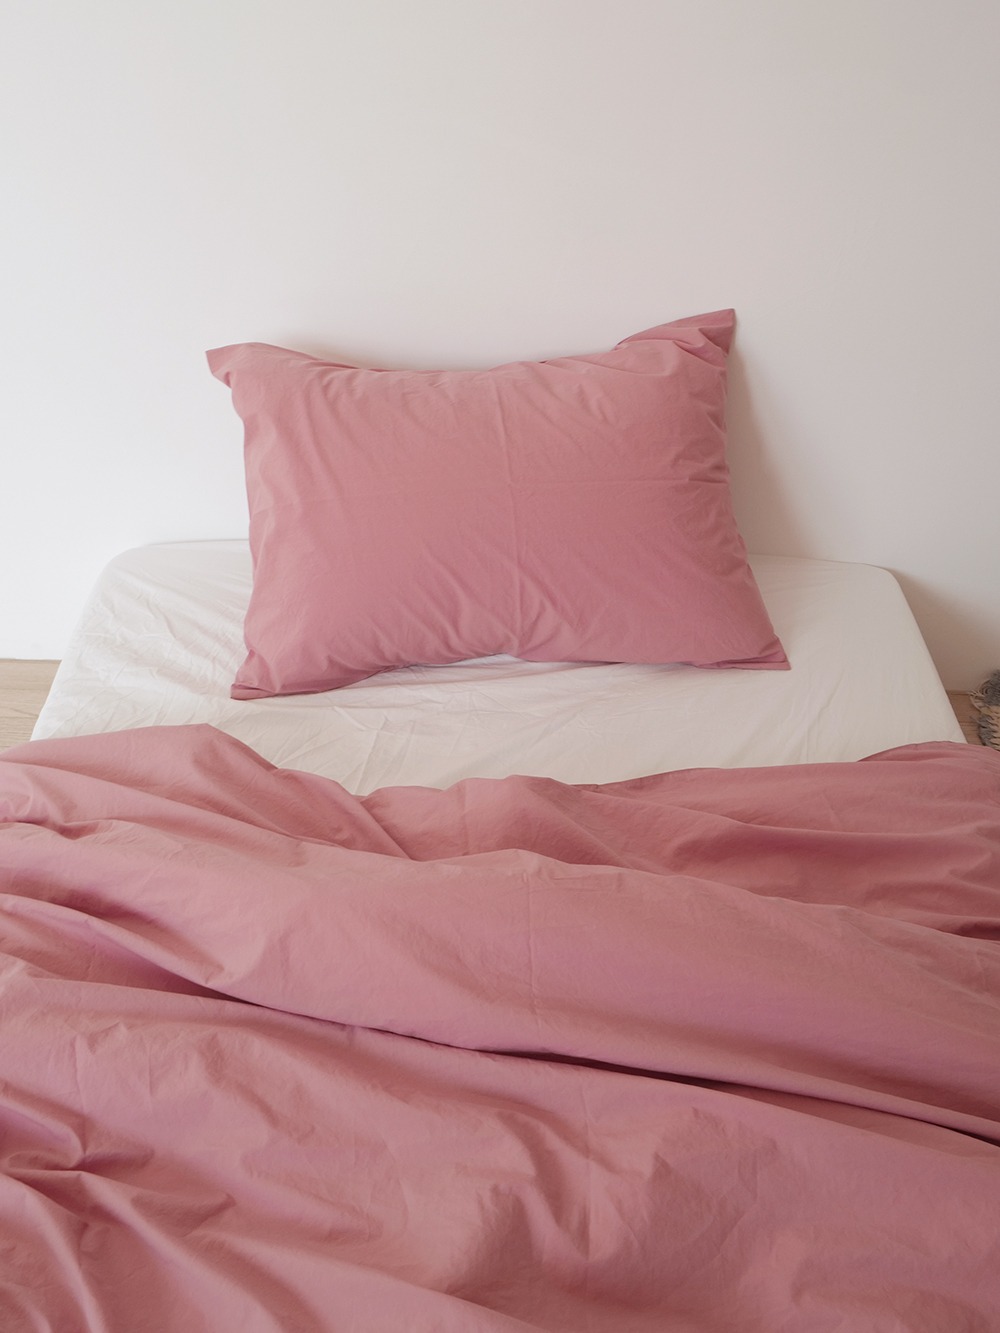 Rose pink pillow cover